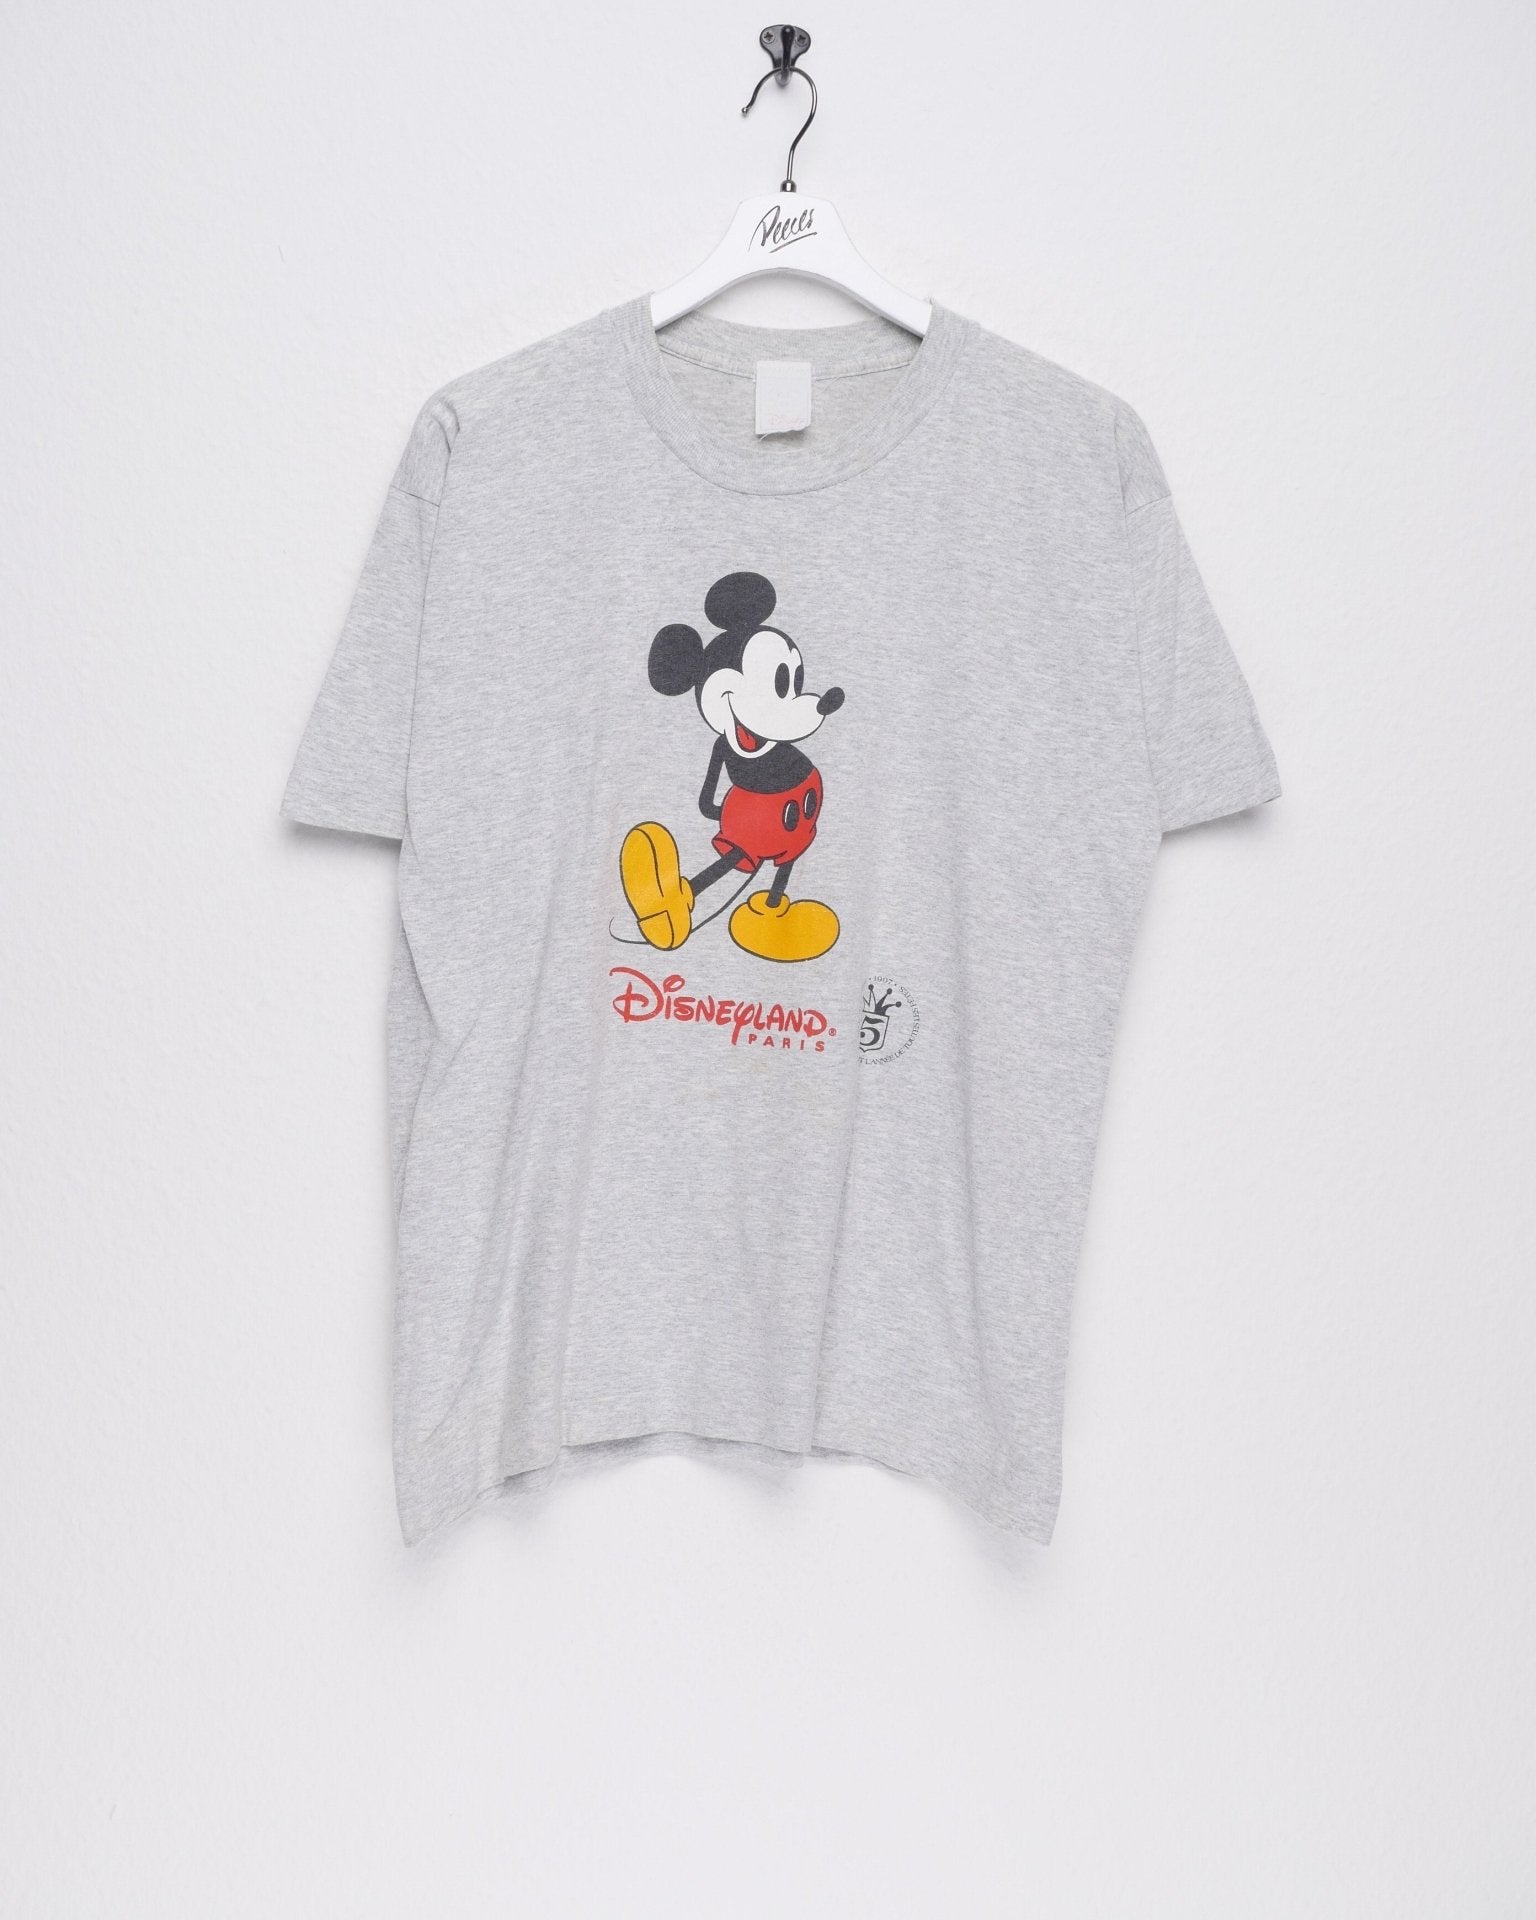 disney 'Mickey Mouse' printed Graphic grey Shirt - Peeces